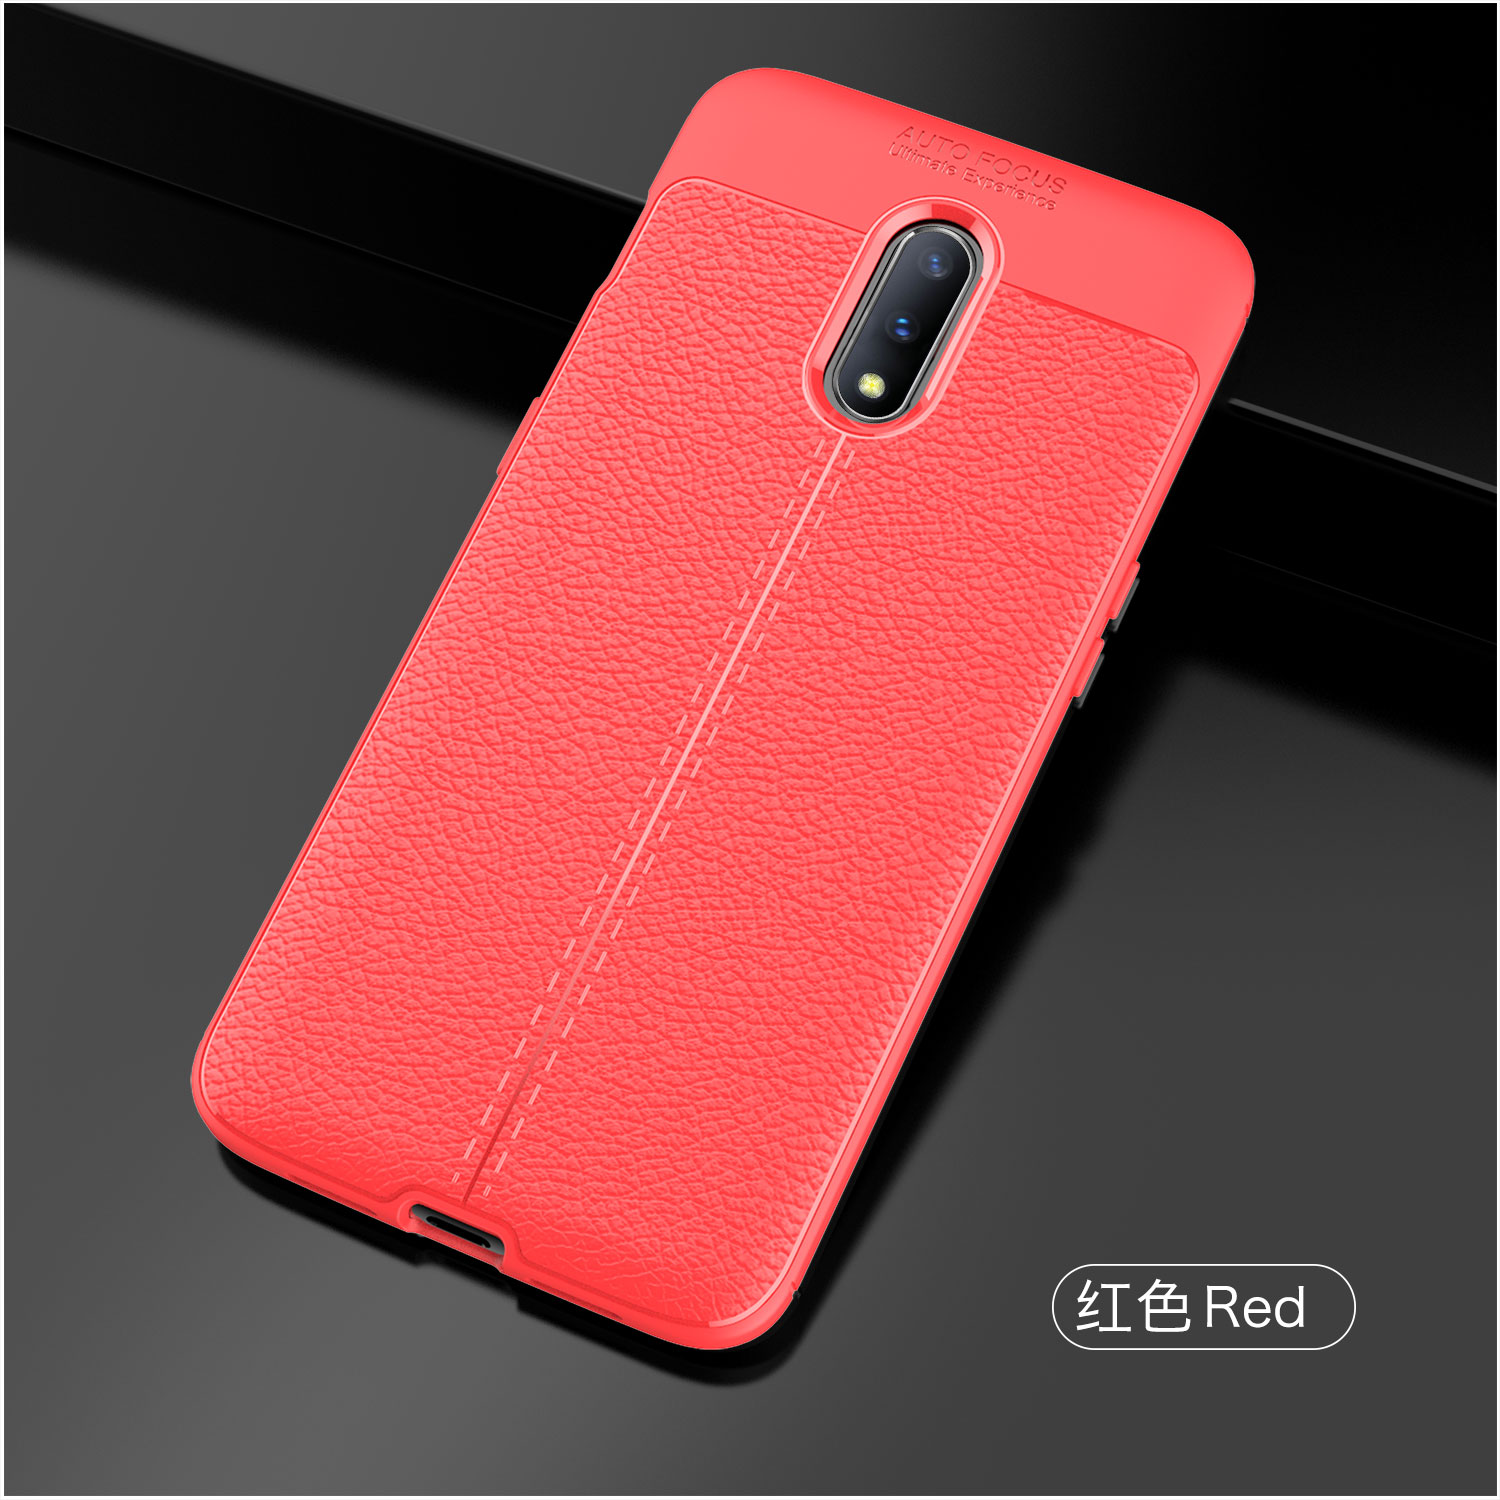 Bakeey-Anti-Fingerprint-Soft-Litchi-Texture-Silicone-Protective-Case-For-OnePlus-7-1500128-12